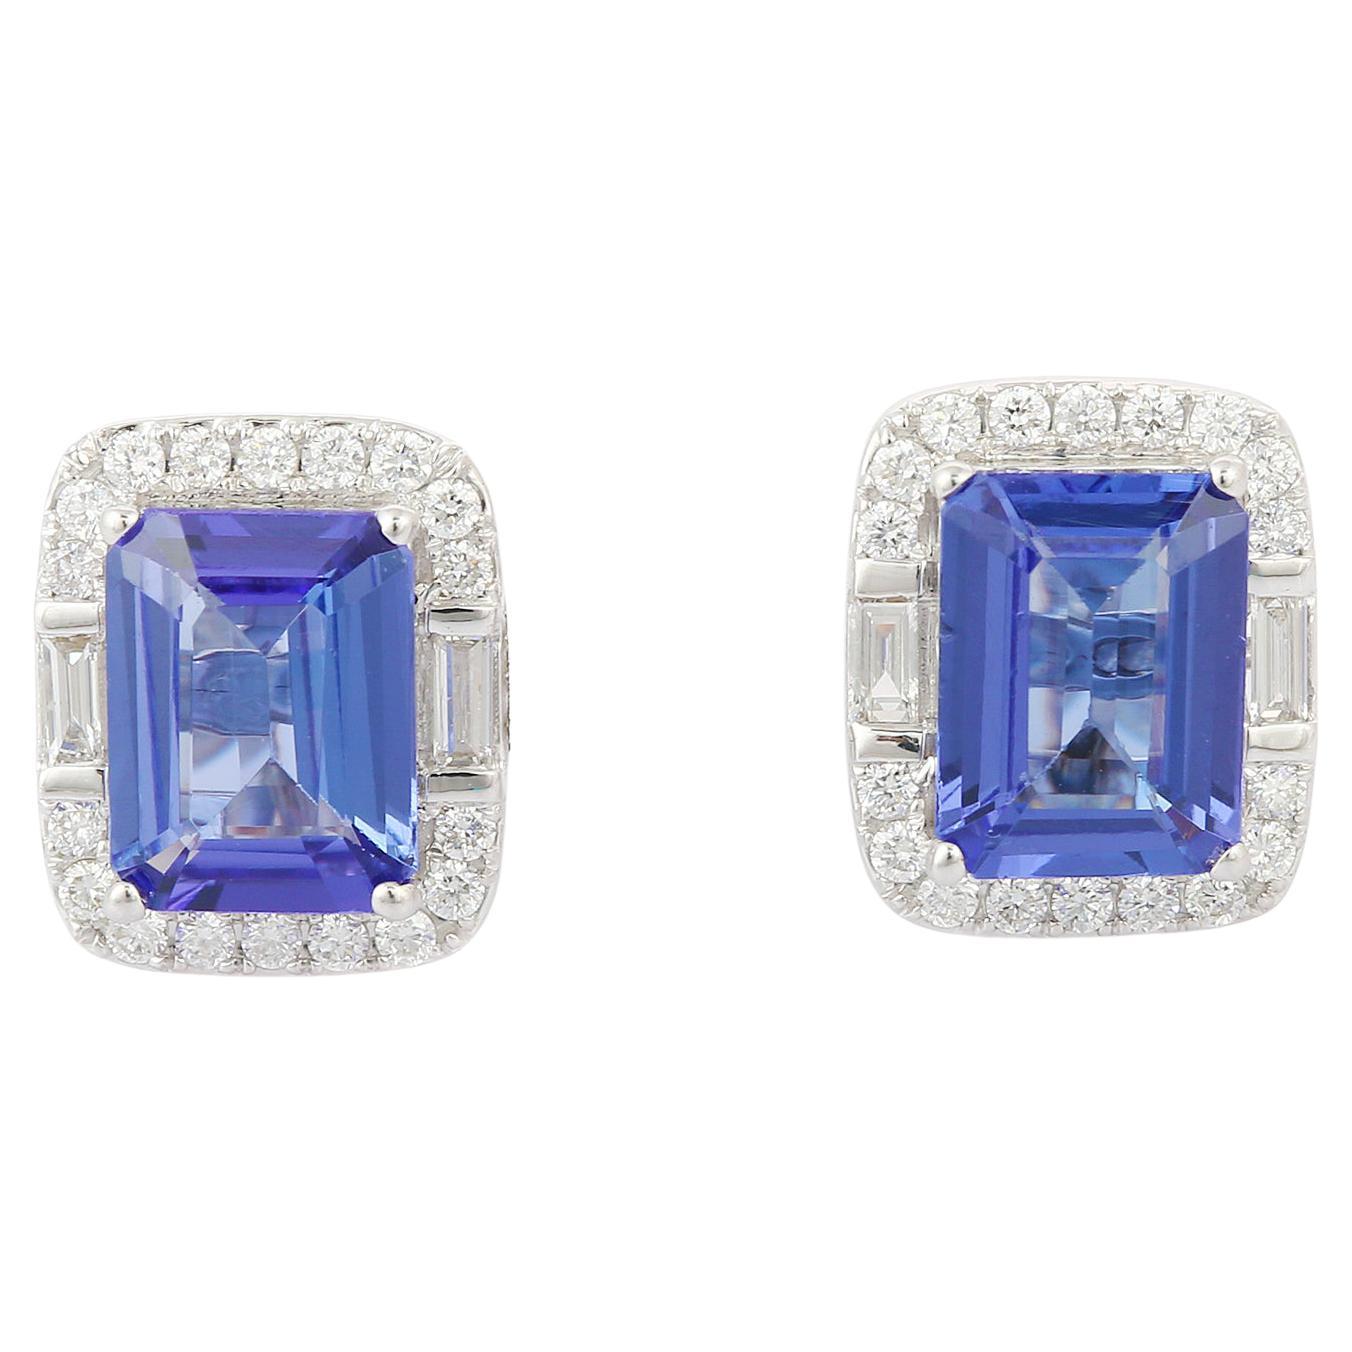 2.85 Carat Natural Tanzanite and Diamond Stud Earrings in 18K White Gold For Sale